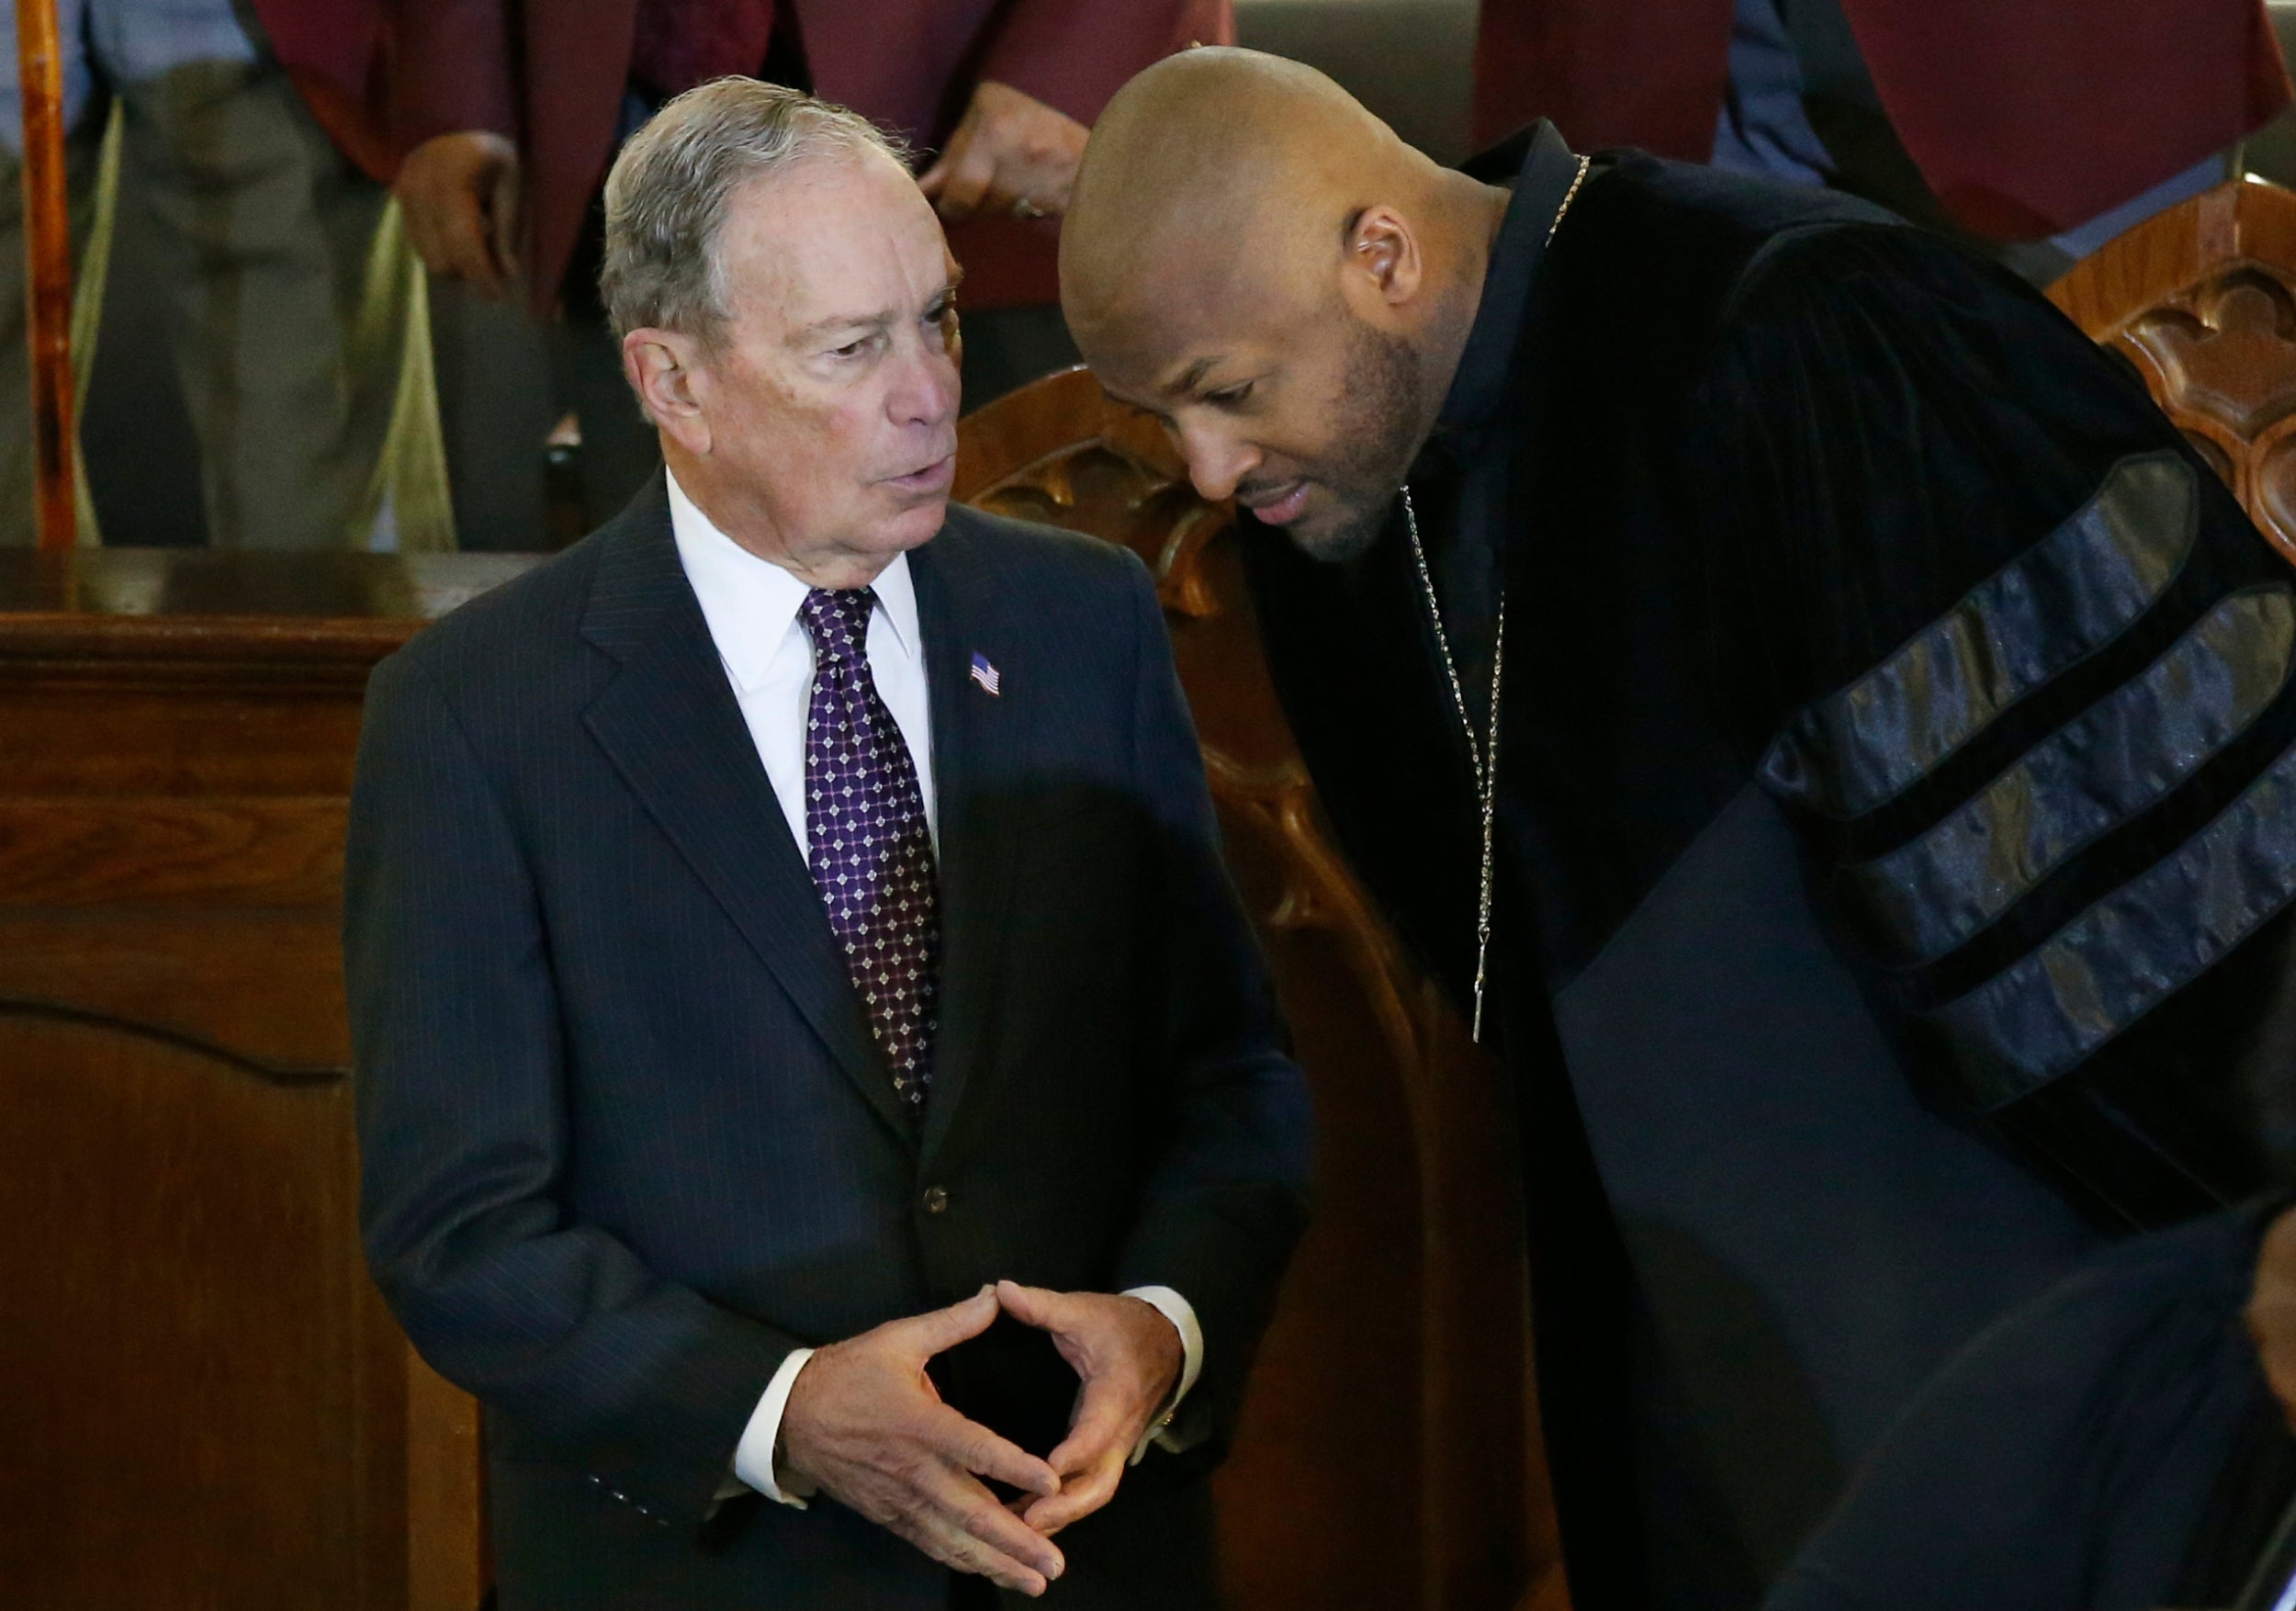 Bloomberg vows to help African-Americans in speech at site of notorious racist massacre